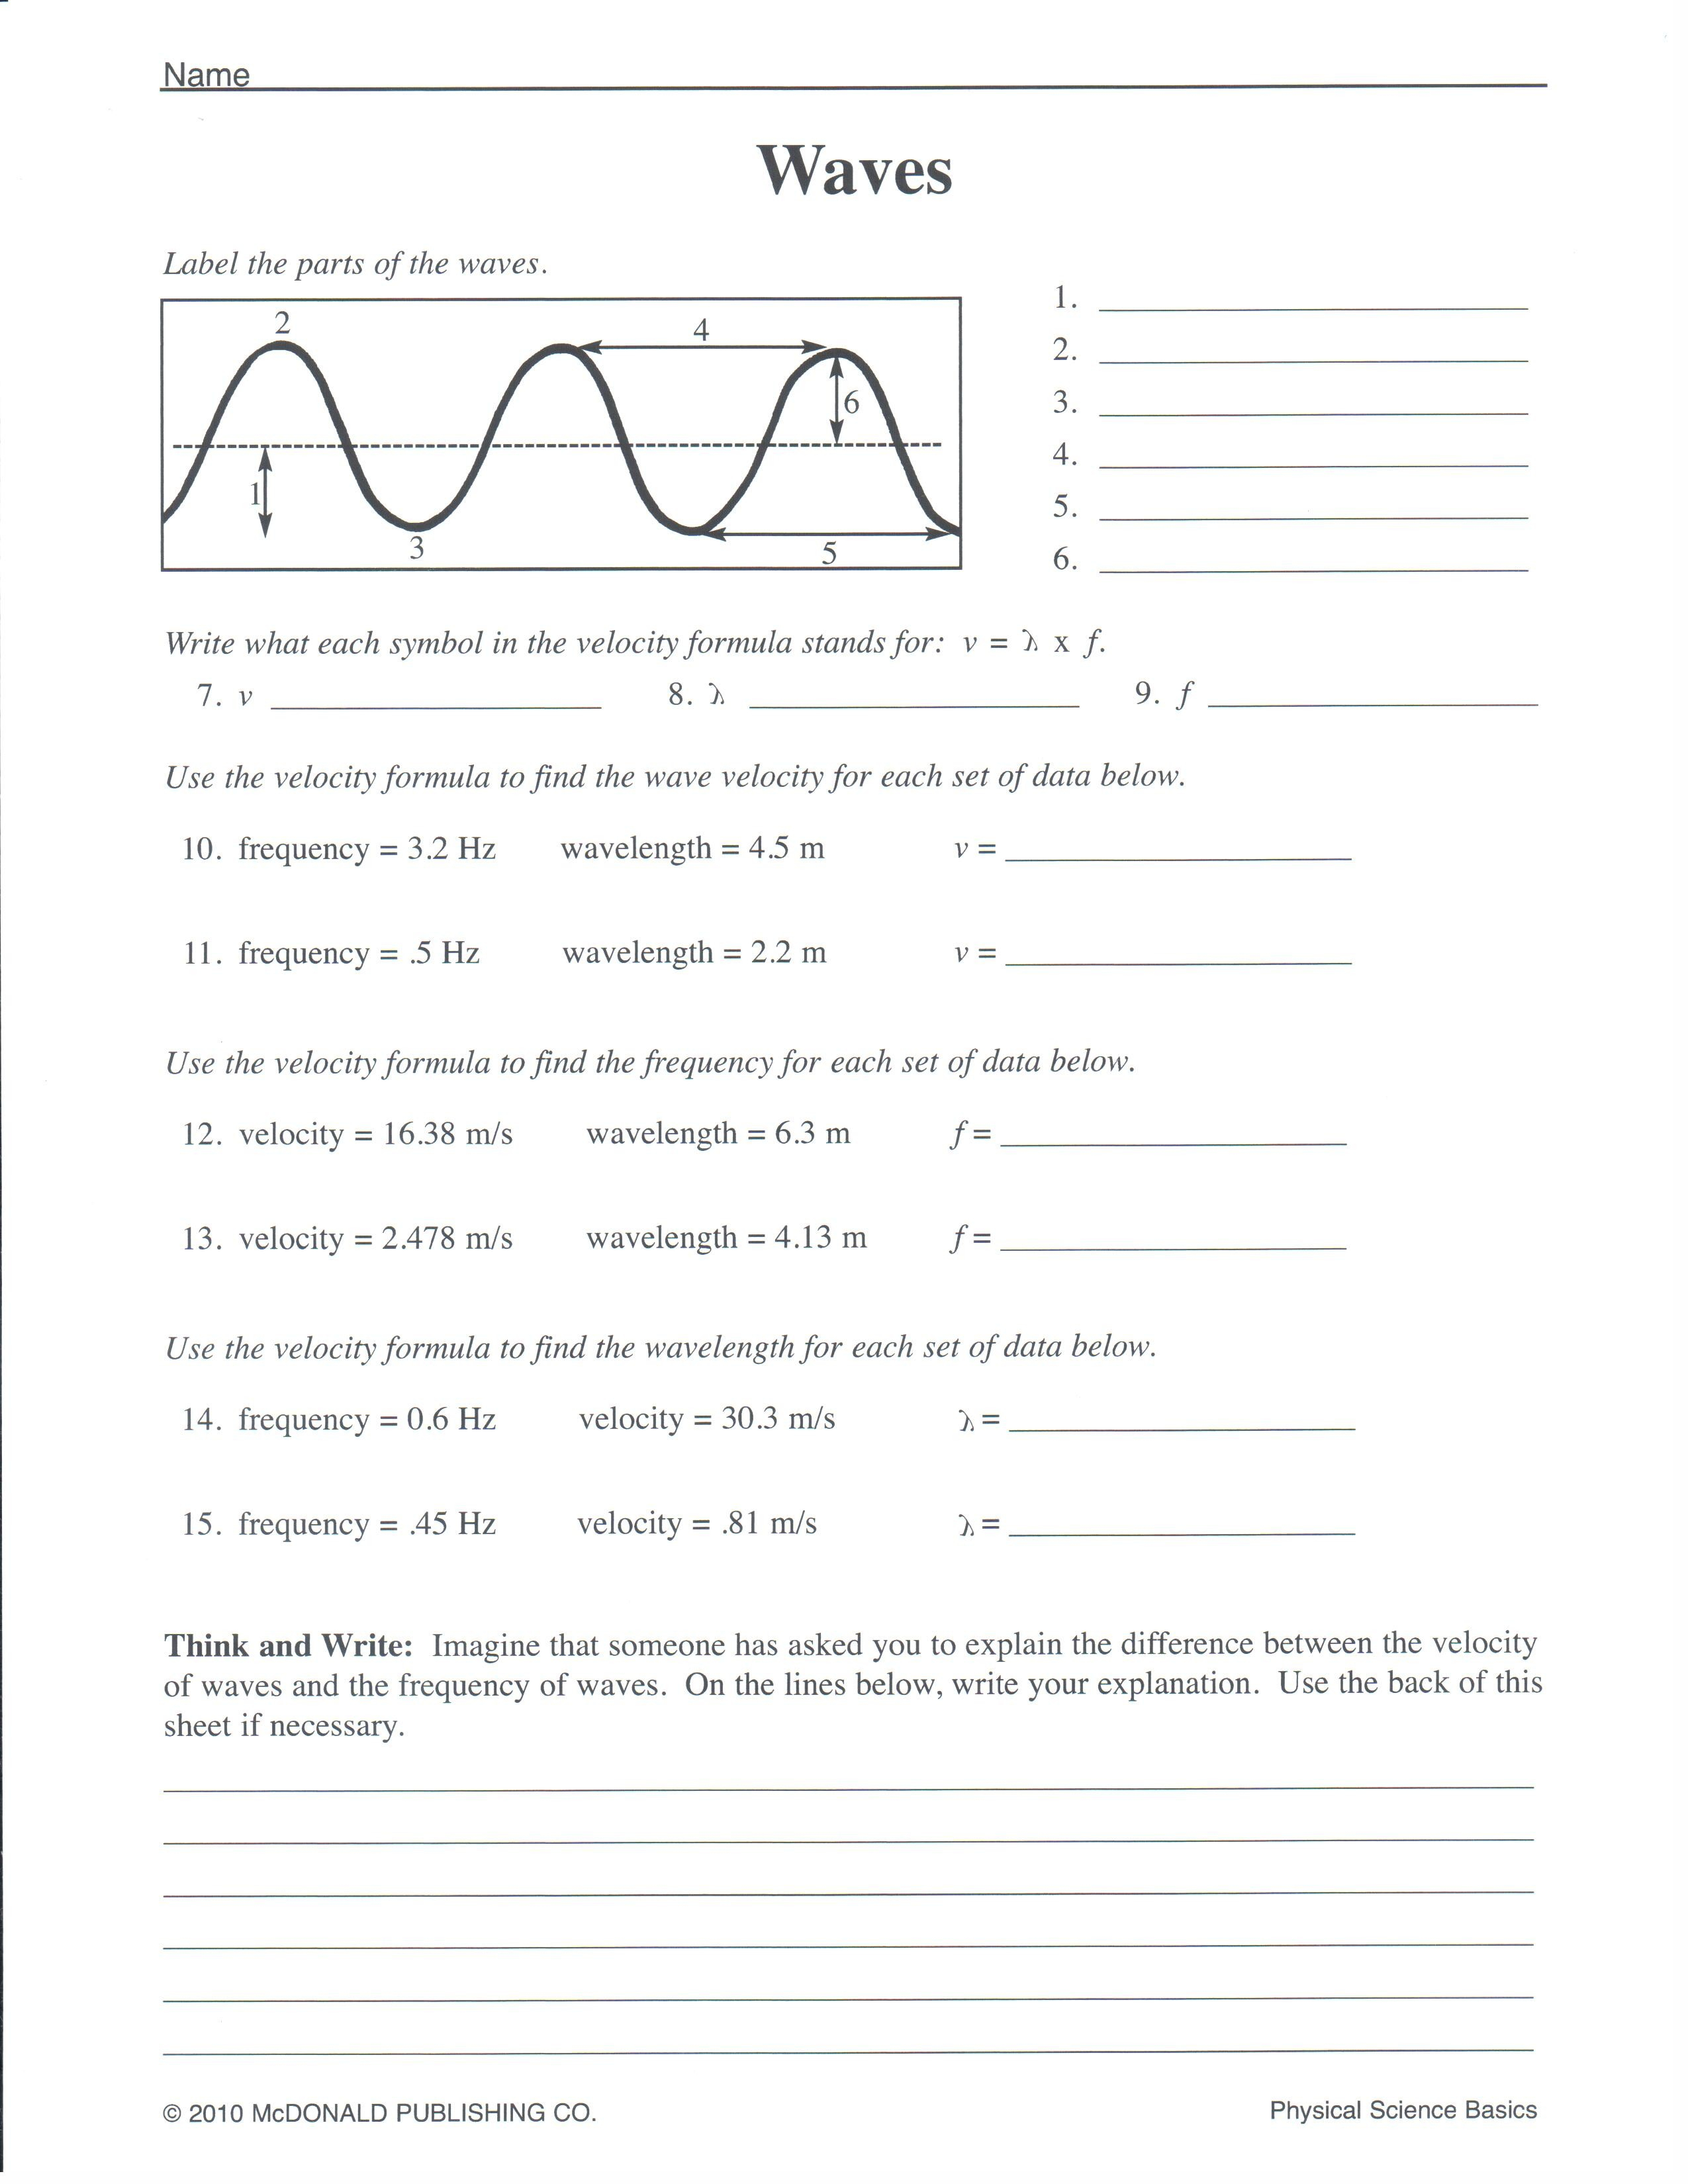 Free Science Worksheets For 2Nd Grade Science Worksheet For Grade 8 - Free Printable Science Worksheets For 2Nd Grade